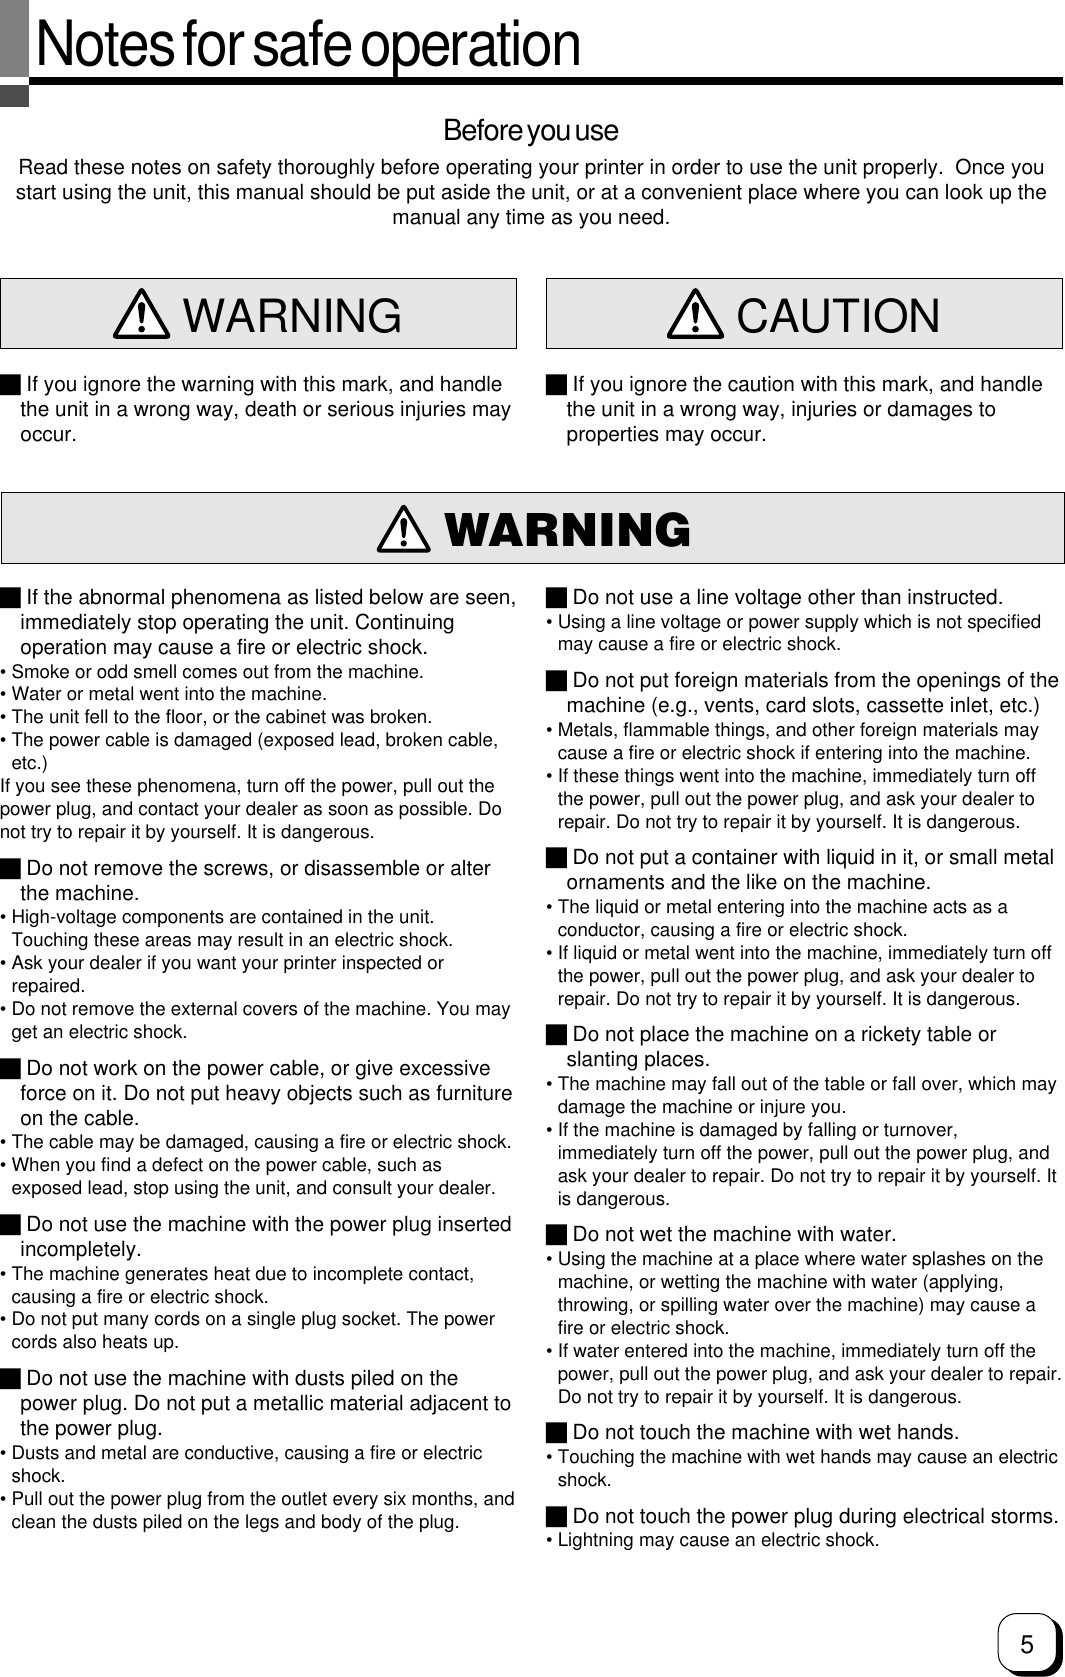 5Notes for safe operationBefore you useRead these notes on safety thoroughly before operating your printer in order to use the unit properly.  Once youstart using the unit, this manual should be put aside the unit, or at a convenient place where you can look up themanual any time as you need.WARNING WARNING  CAUTION If you ignore the warning with this mark, and handlethe unit in a wrong way, death or serious injuries mayoccur. If you ignore the caution with this mark, and handlethe unit in a wrong way, injuries or damages toproperties may occur. If the abnormal phenomena as listed below are seen,immediately stop operating the unit. Continuingoperation may cause a fire or electric shock.• Smoke or odd smell comes out from the machine.• Water or metal went into the machine.• The unit fell to the floor, or the cabinet was broken.• The power cable is damaged (exposed lead, broken cable,etc.)If you see these phenomena, turn off the power, pull out thepower plug, and contact your dealer as soon as possible. Donot try to repair it by yourself. It is dangerous. Do not remove the screws, or disassemble or alterthe machine.• High-voltage components are contained in the unit.Touching these areas may result in an electric shock.• Ask your dealer if you want your printer inspected orrepaired.• Do not remove the external covers of the machine. You mayget an electric shock. Do not work on the power cable, or give excessiveforce on it. Do not put heavy objects such as furnitureon the cable.• The cable may be damaged, causing a fire or electric shock.• When you find a defect on the power cable, such asexposed lead, stop using the unit, and consult your dealer. Do not use the machine with the power plug insertedincompletely.• The machine generates heat due to incomplete contact,causing a fire or electric shock.• Do not put many cords on a single plug socket. The powercords also heats up. Do not use the machine with dusts piled on thepower plug. Do not put a metallic material adjacent tothe power plug.• Dusts and metal are conductive, causing a fire or electricshock.• Pull out the power plug from the outlet every six months, andclean the dusts piled on the legs and body of the plug. Do not use a line voltage other than instructed.• Using a line voltage or power supply which is not specifiedmay cause a fire or electric shock. Do not put foreign materials from the openings of themachine (e.g., vents, card slots, cassette inlet, etc.)• Metals, flammable things, and other foreign materials maycause a fire or electric shock if entering into the machine.• If these things went into the machine, immediately turn offthe power, pull out the power plug, and ask your dealer torepair. Do not try to repair it by yourself. It is dangerous. Do not put a container with liquid in it, or small metalornaments and the like on the machine.• The liquid or metal entering into the machine acts as aconductor, causing a fire or electric shock.• If liquid or metal went into the machine, immediately turn offthe power, pull out the power plug, and ask your dealer torepair. Do not try to repair it by yourself. It is dangerous. Do not place the machine on a rickety table orslanting places.• The machine may fall out of the table or fall over, which maydamage the machine or injure you.• If the machine is damaged by falling or turnover,immediately turn off the power, pull out the power plug, andask your dealer to repair. Do not try to repair it by yourself. Itis dangerous. Do not wet the machine with water.• Using the machine at a place where water splashes on themachine, or wetting the machine with water (applying,throwing, or spilling water over the machine) may cause afire or electric shock.• If water entered into the machine, immediately turn off thepower, pull out the power plug, and ask your dealer to repair.Do not try to repair it by yourself. It is dangerous. Do not touch the machine with wet hands.• Touching the machine with wet hands may cause an electricshock. Do not touch the power plug during electrical storms.• Lightning may cause an electric shock.